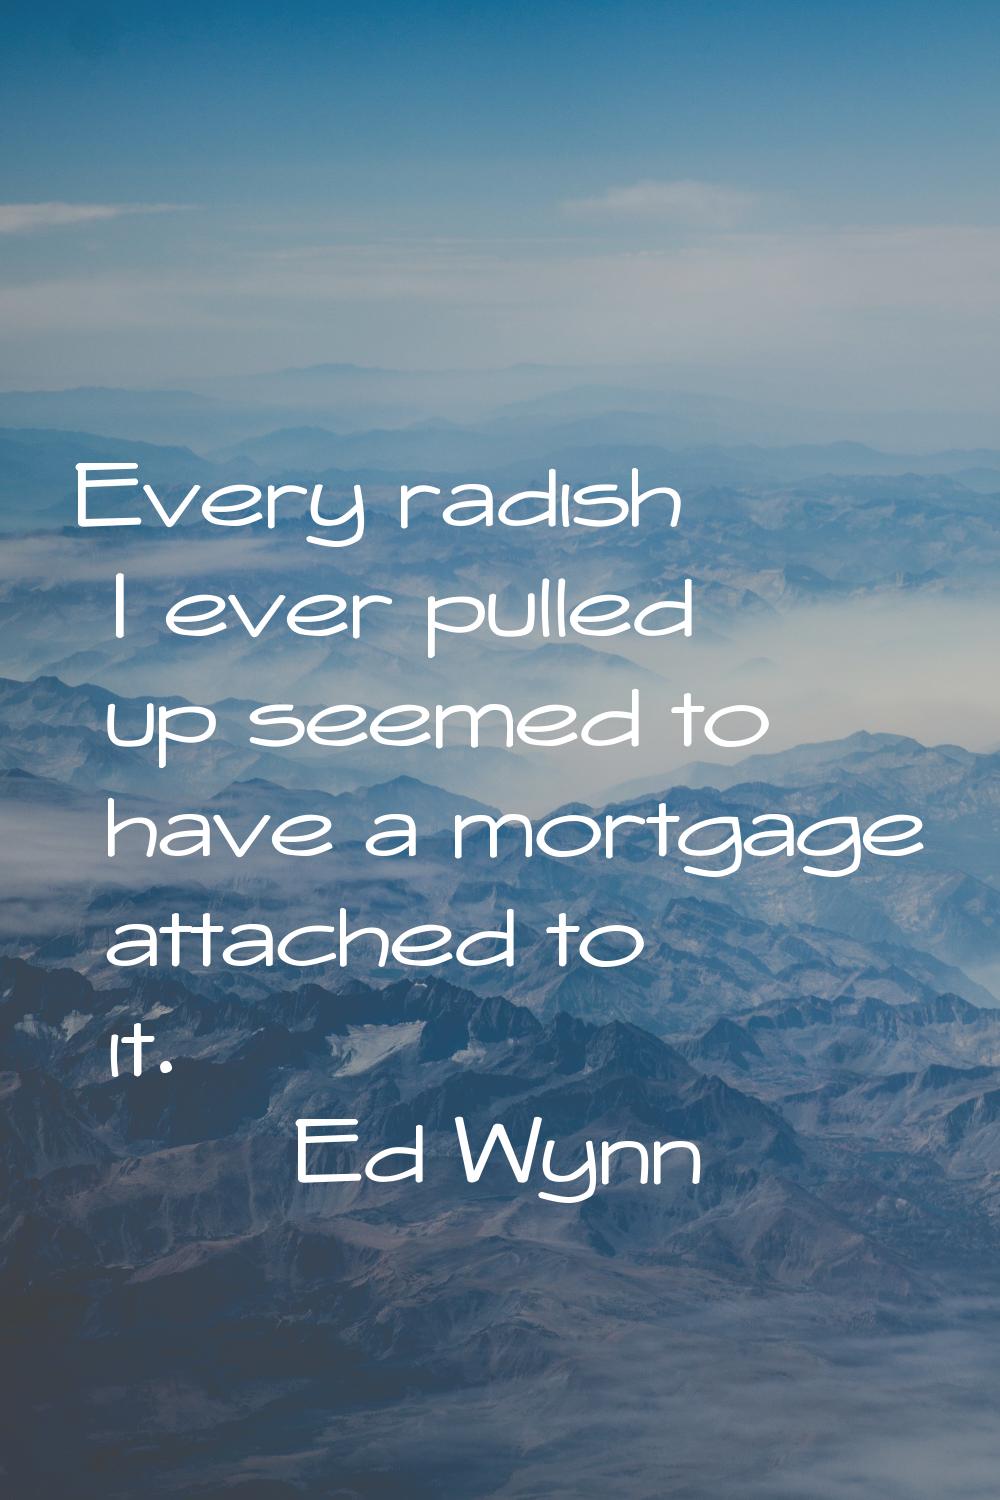 Every radish I ever pulled up seemed to have a mortgage attached to it.